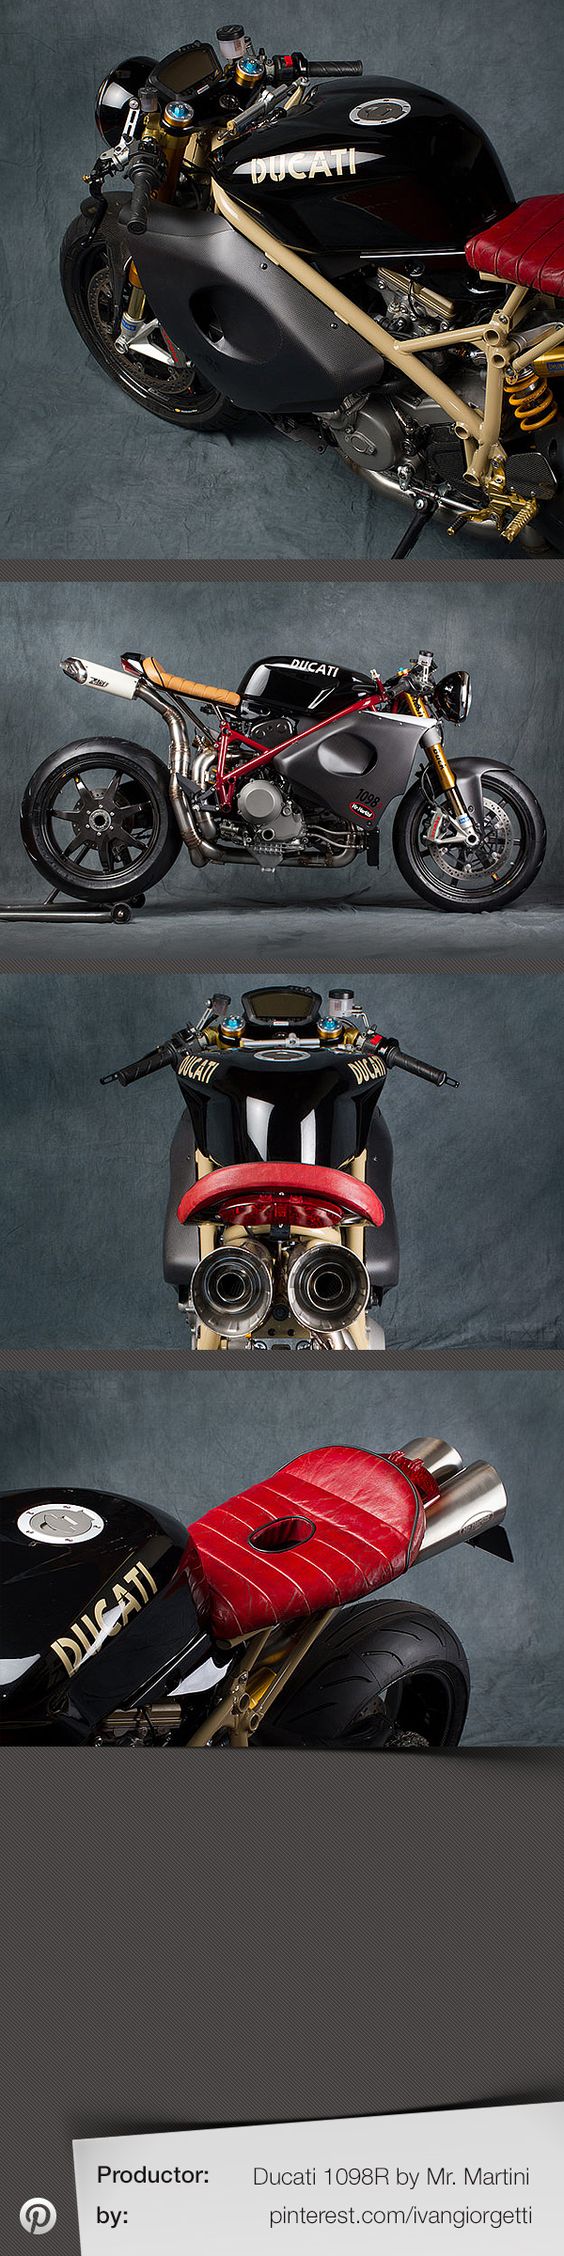 Ducati 1098R by Mr. Martini #custom #motorcycle #caferacer Holy balls, this bike is absurdly fantastic looking.